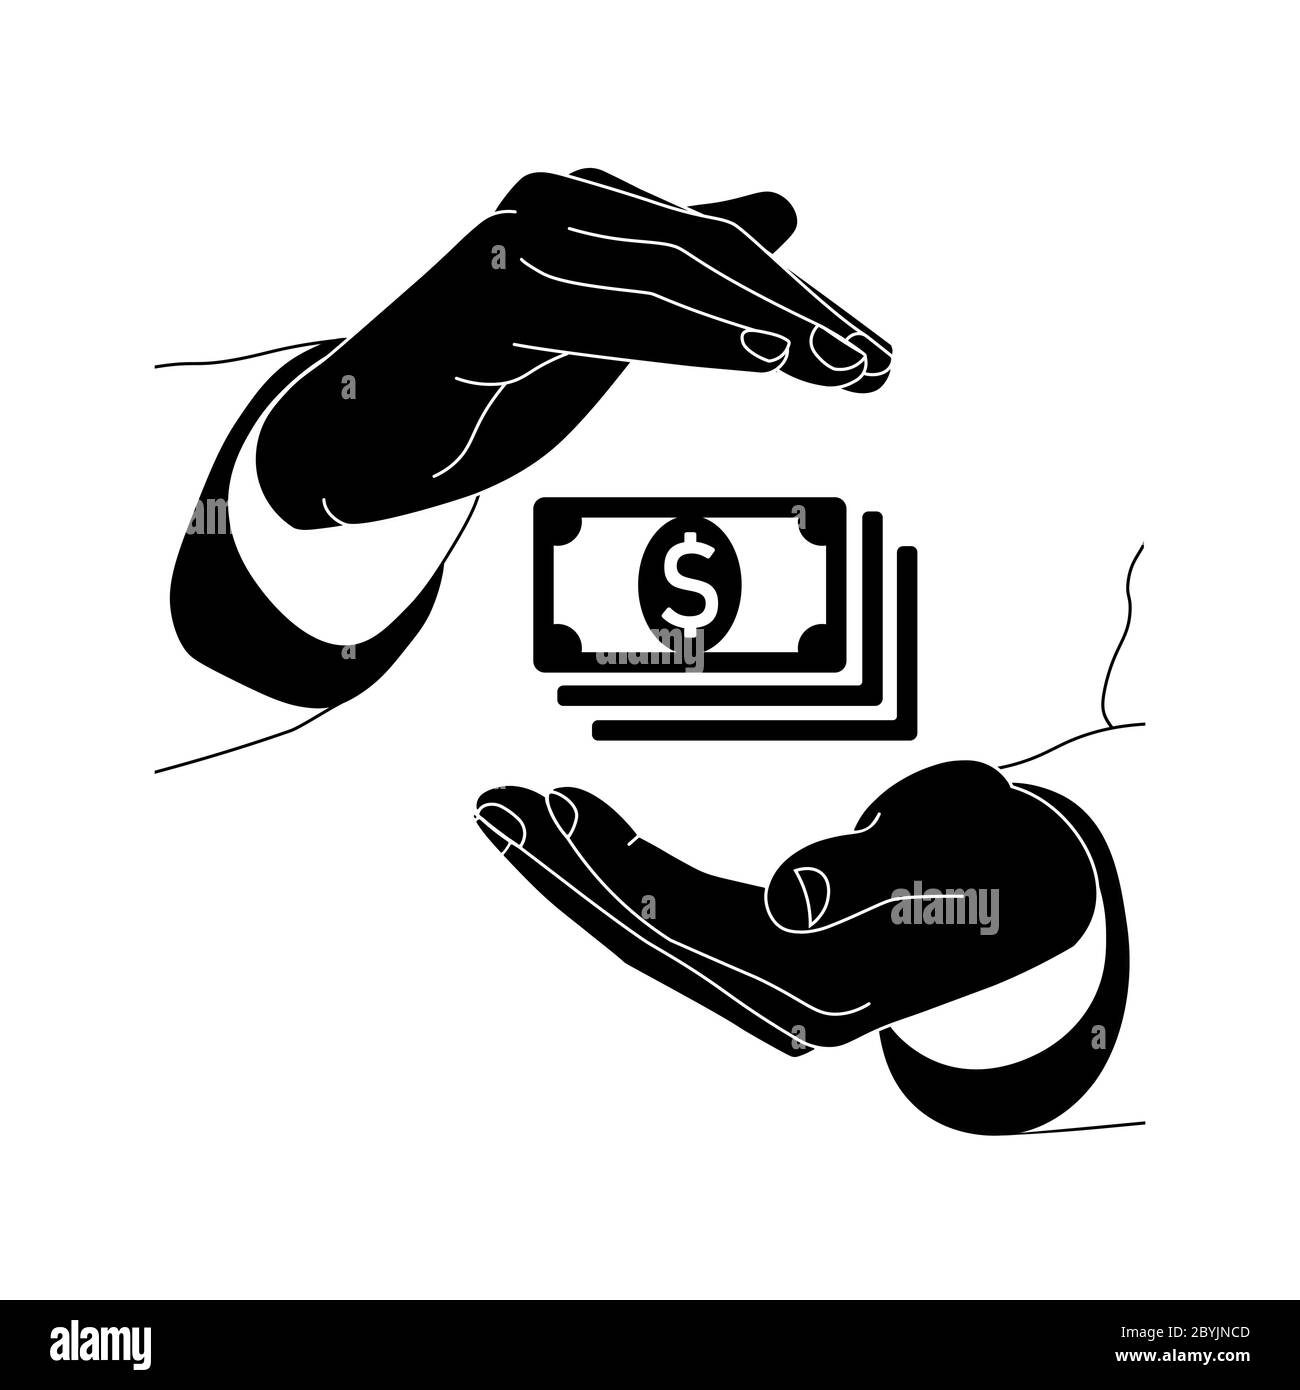 Hands are holding money, banknote or dollar bill icon flat logo in black on isolated white background. EPS 10 vector. Stock Vector